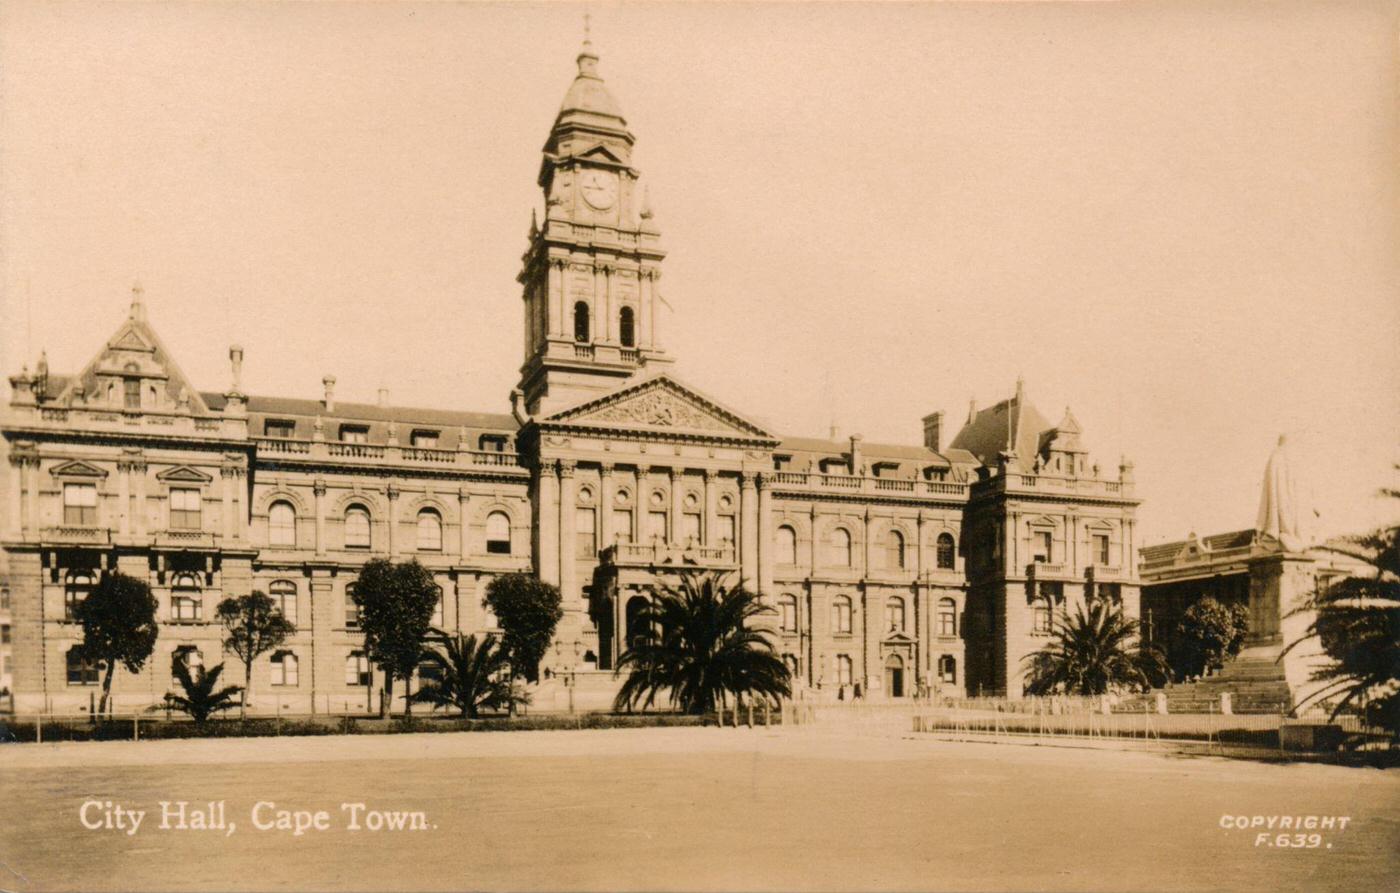 City Hall, Cape Town', 1933